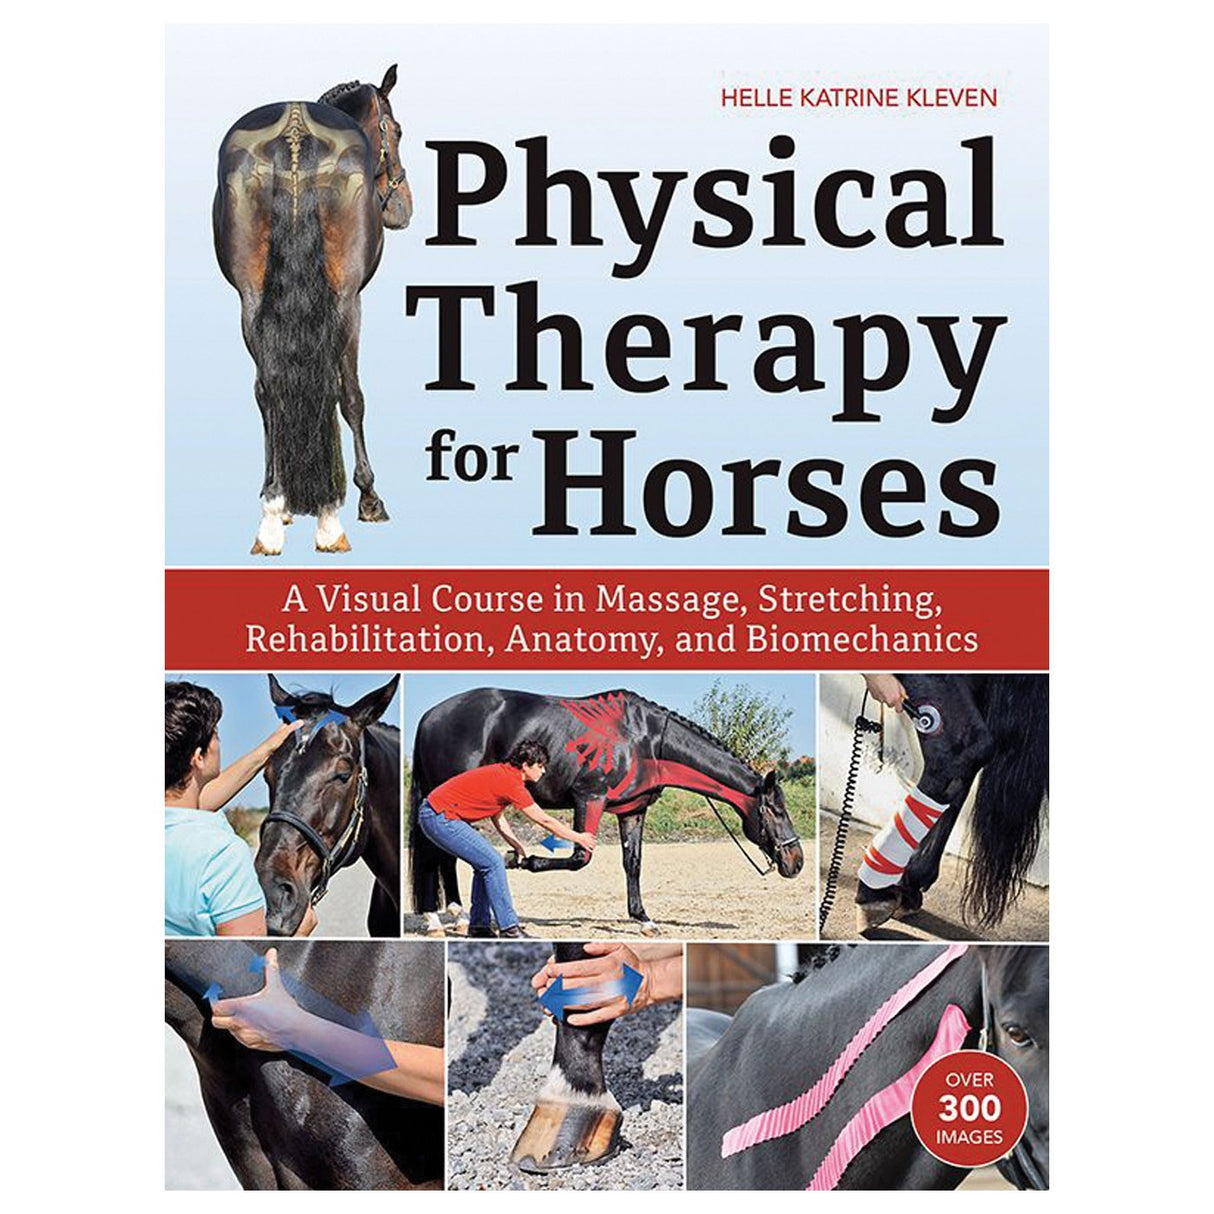 Physical Therapy for Horses